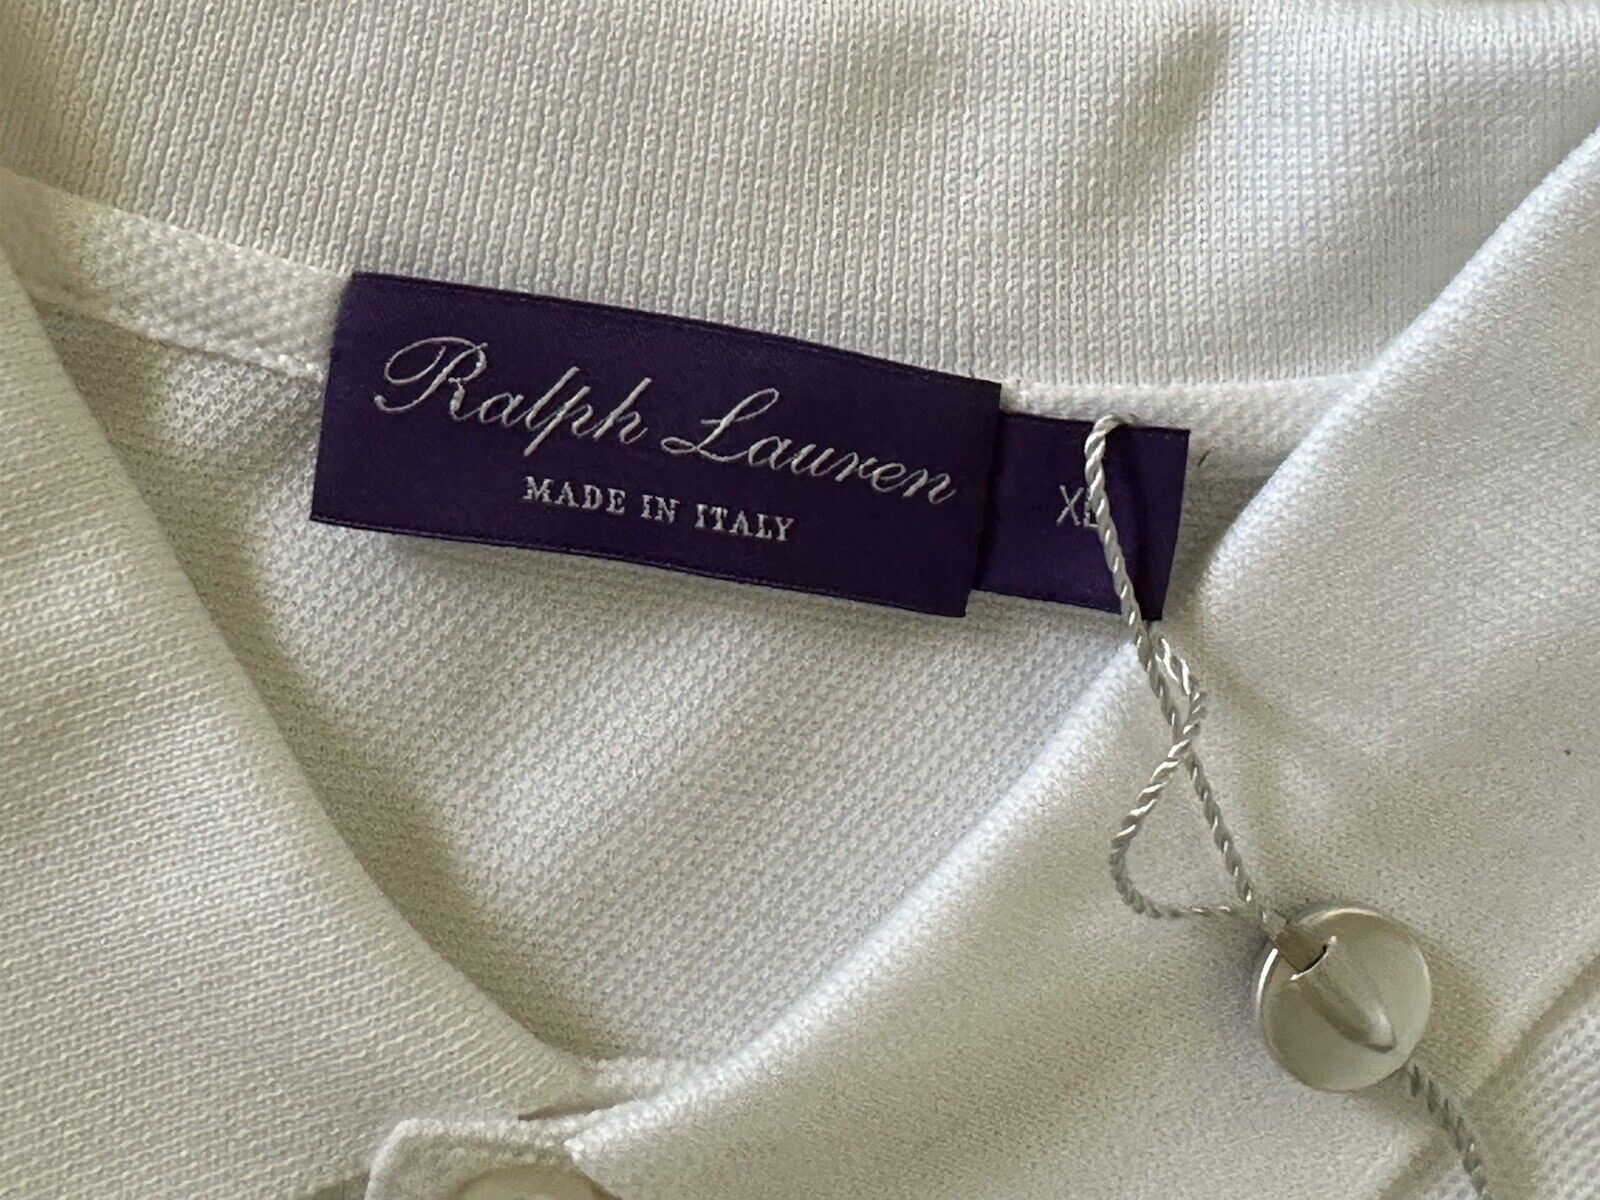 NWT $395 Ralph Lauren Purple Label Cotton White Polo Shirt XL Made in Italy